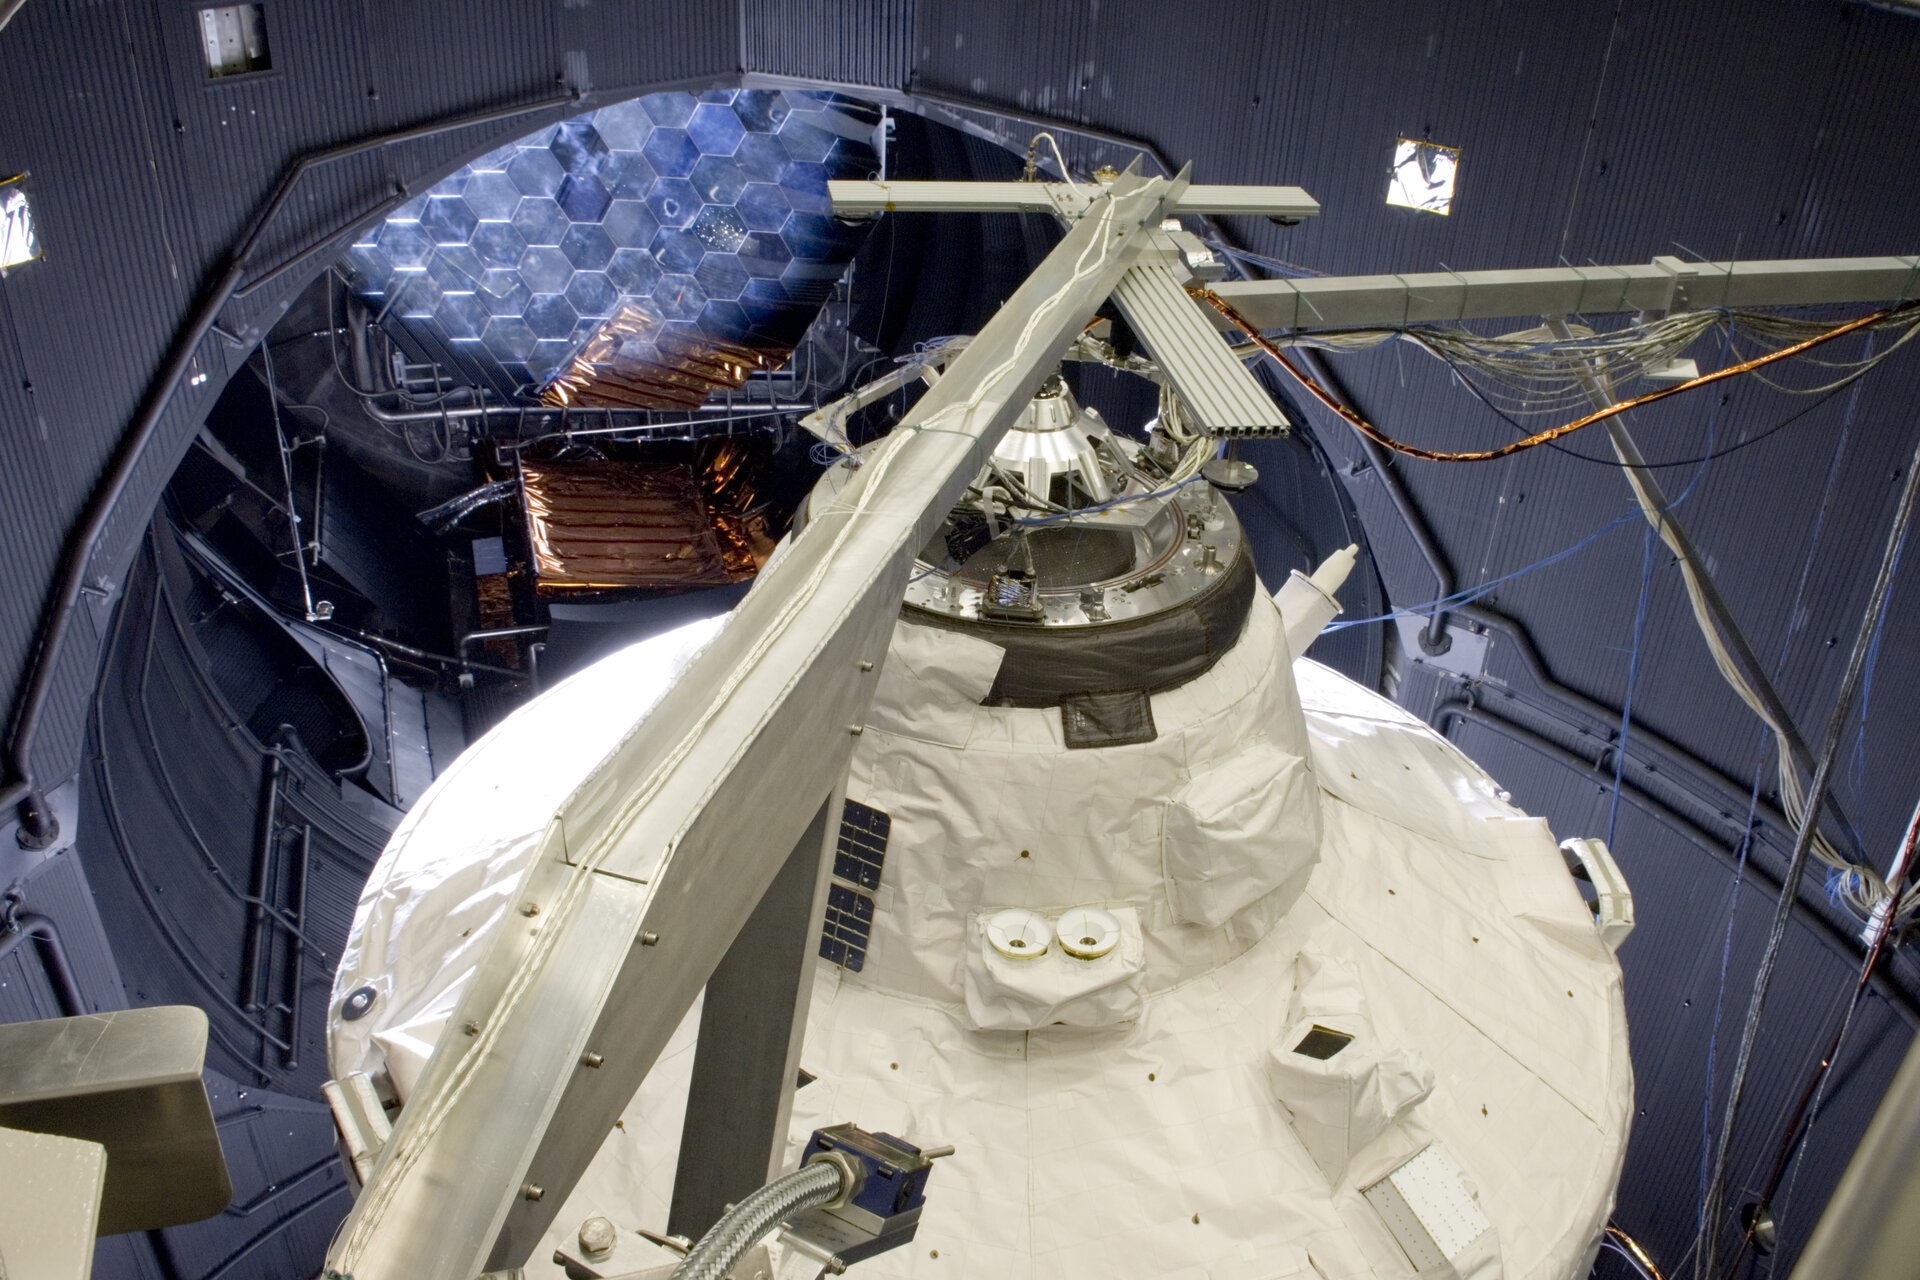 Jules Verne ATV was placed in the Large Space Simulator